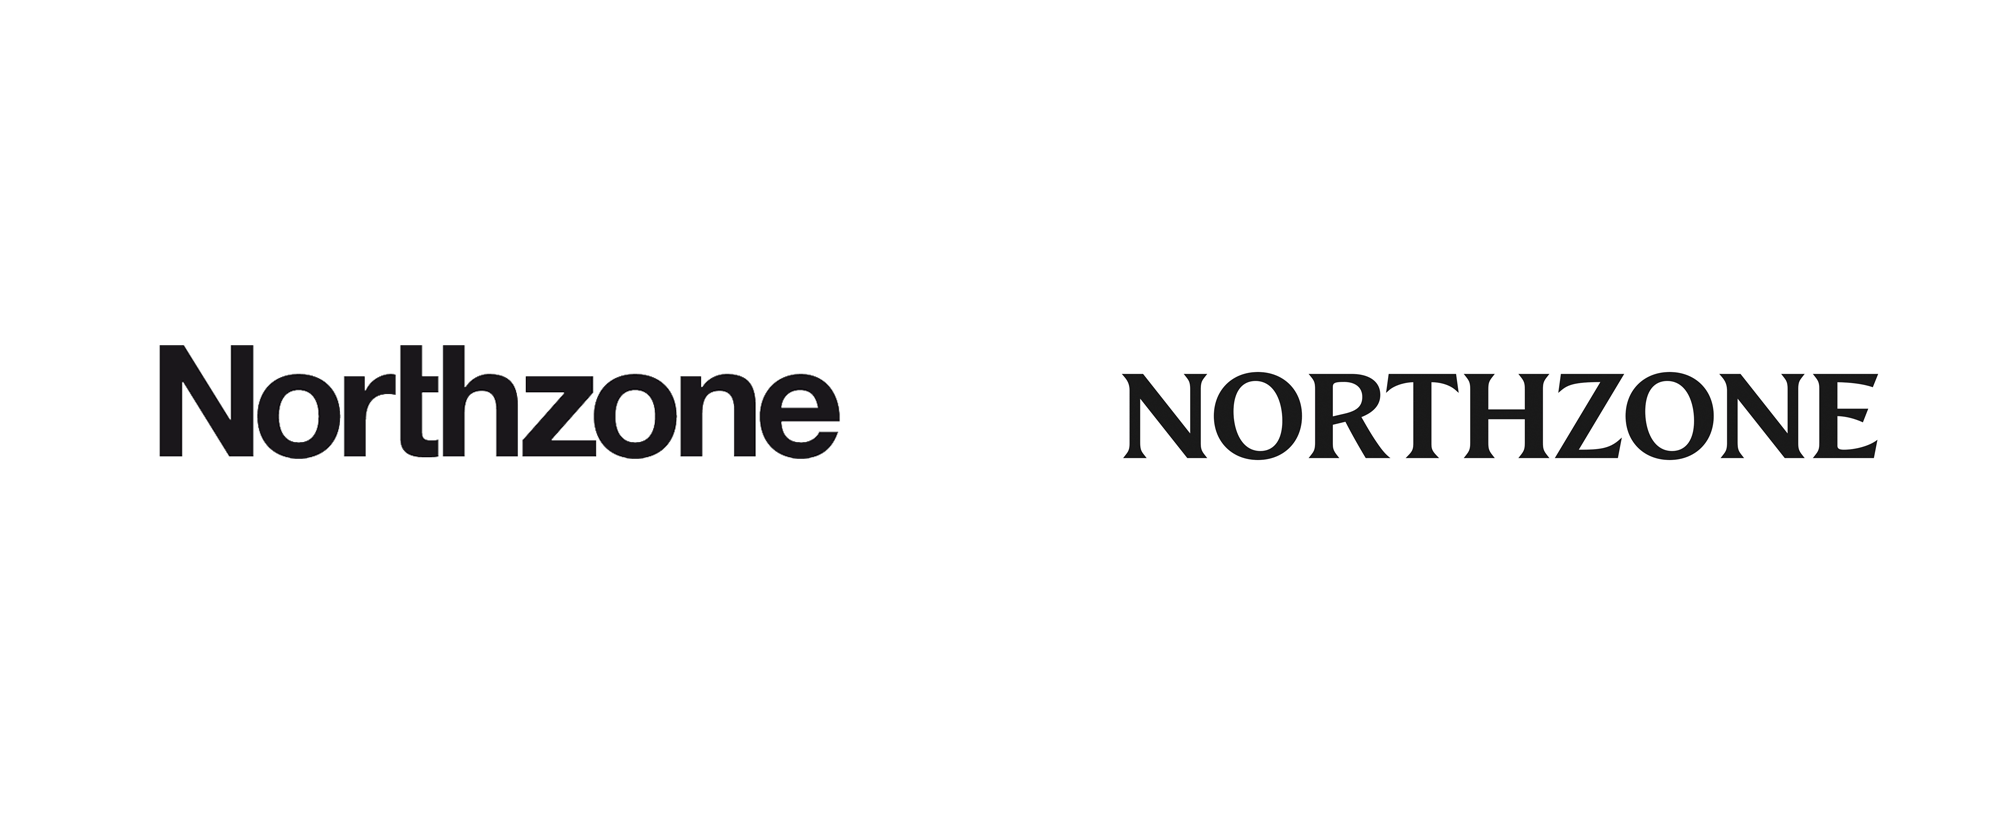 New Logo and Identity for Northzone by Ragged Edge